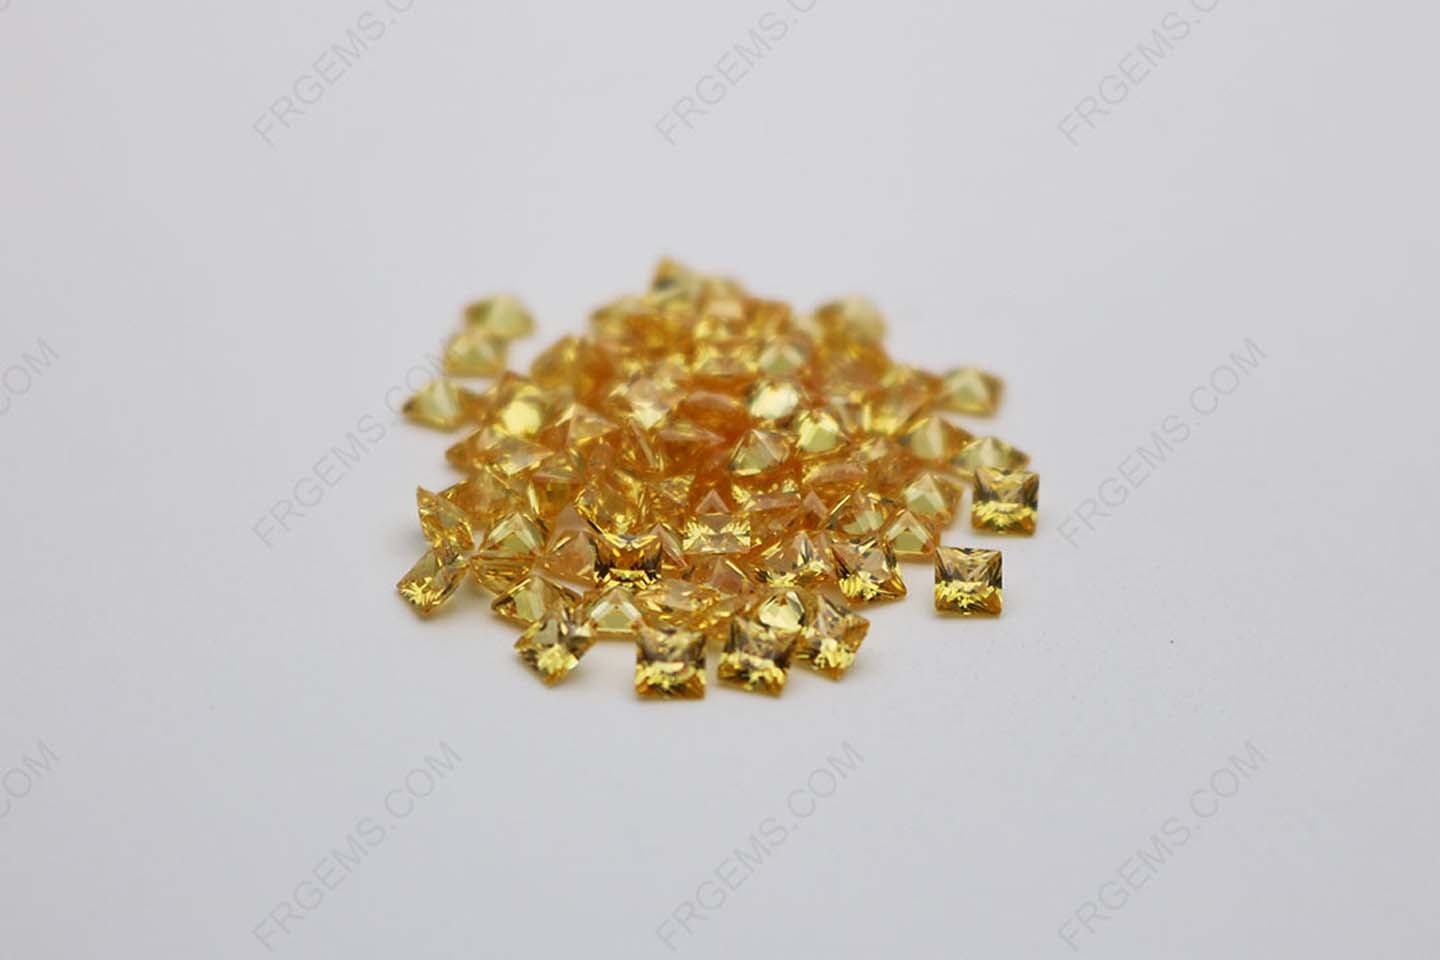 Cubic Zirconia Golden Yellow Square Shape faceted Princess Cut 5x5mm stones CZ05 IMG_0310